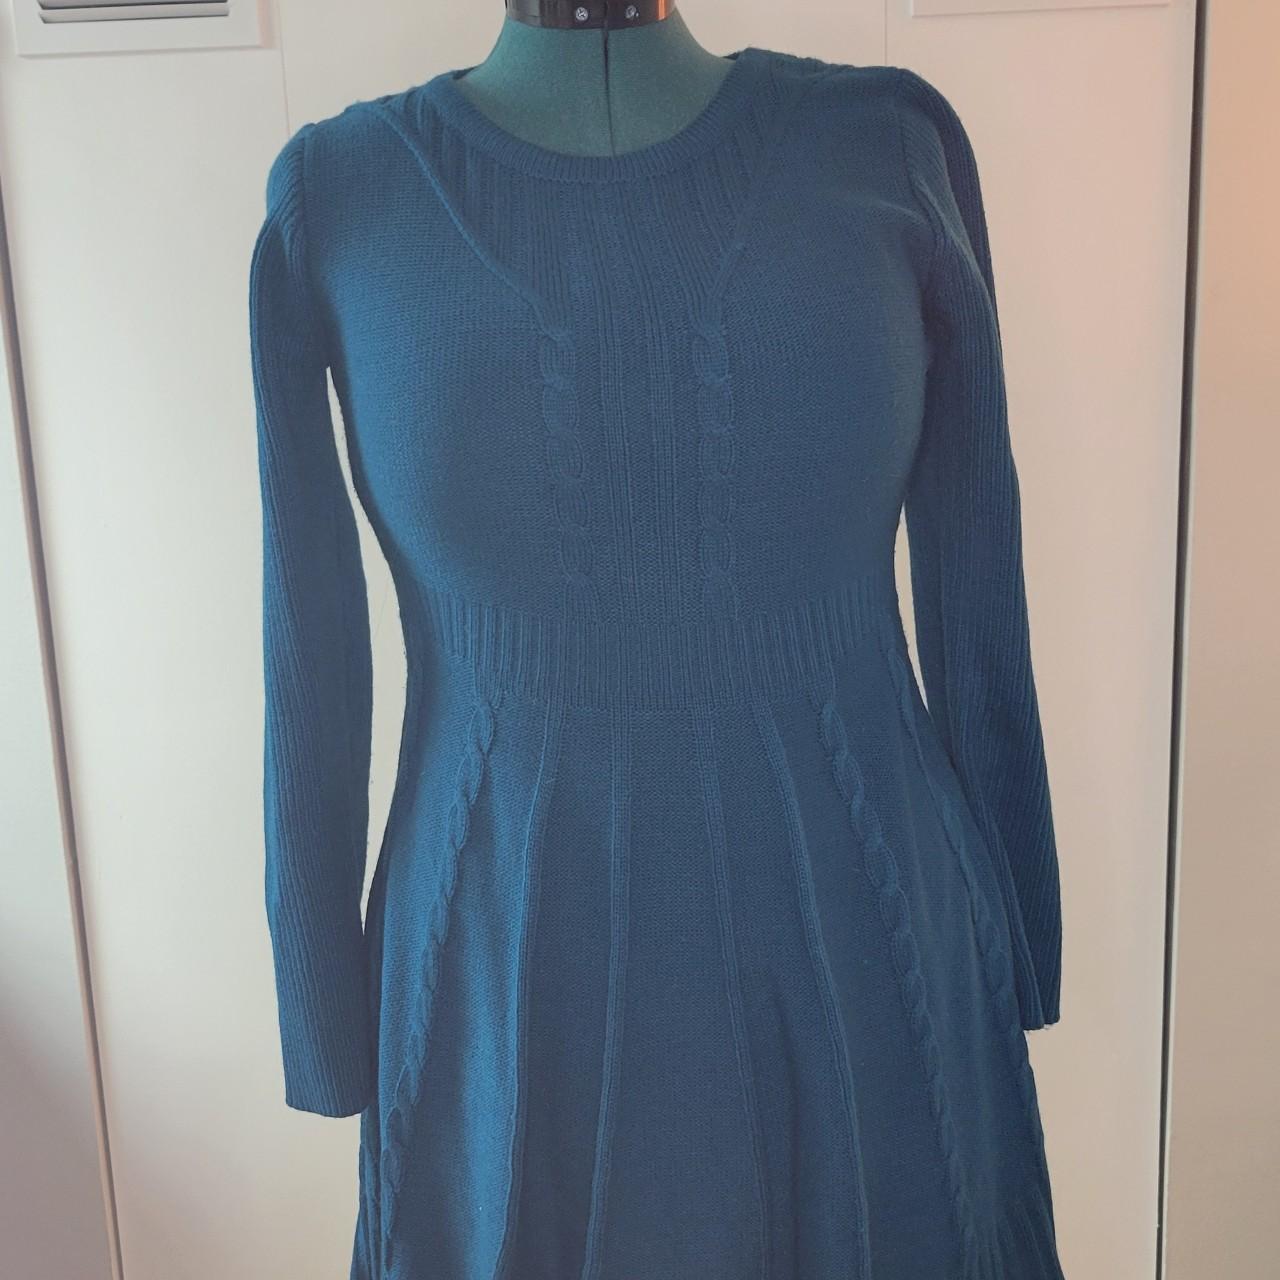 Teal sweater dress from Amazon. Only worn once. Size... - Depop